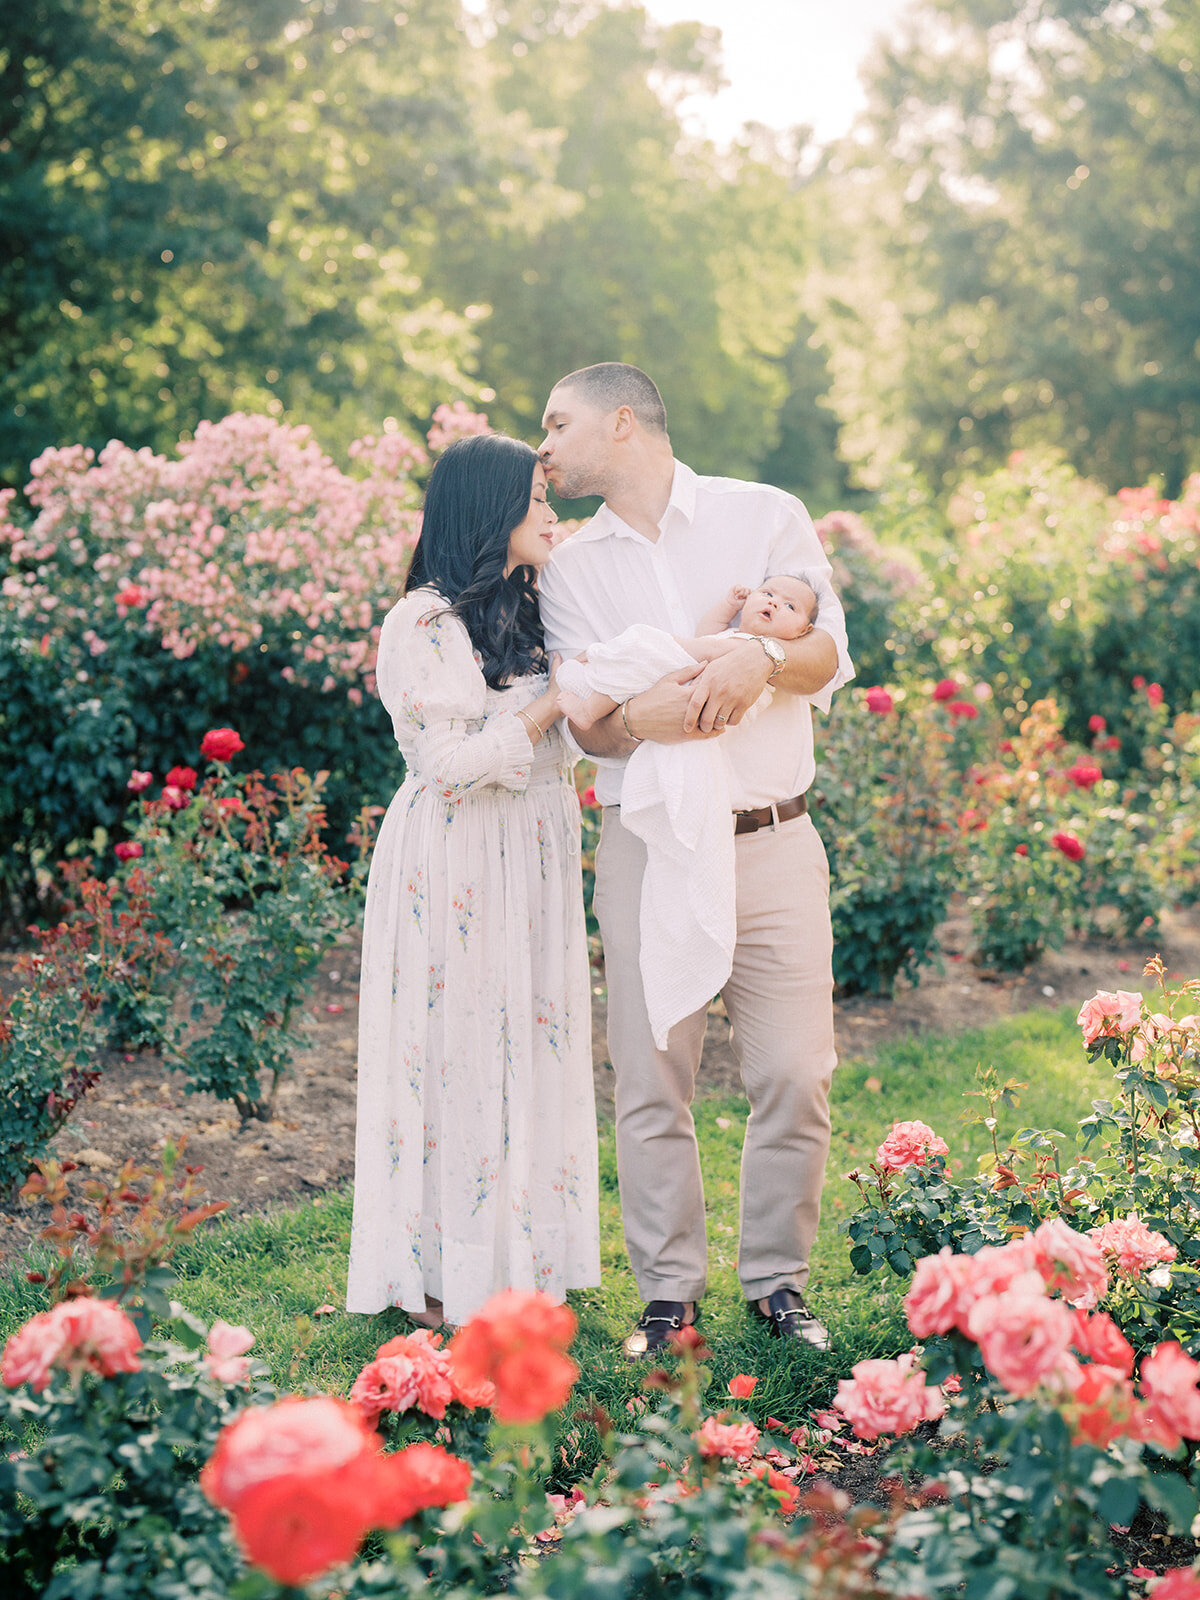 Two Asian parents stand in a rose garden holding their baby girl in Northern Virginia.